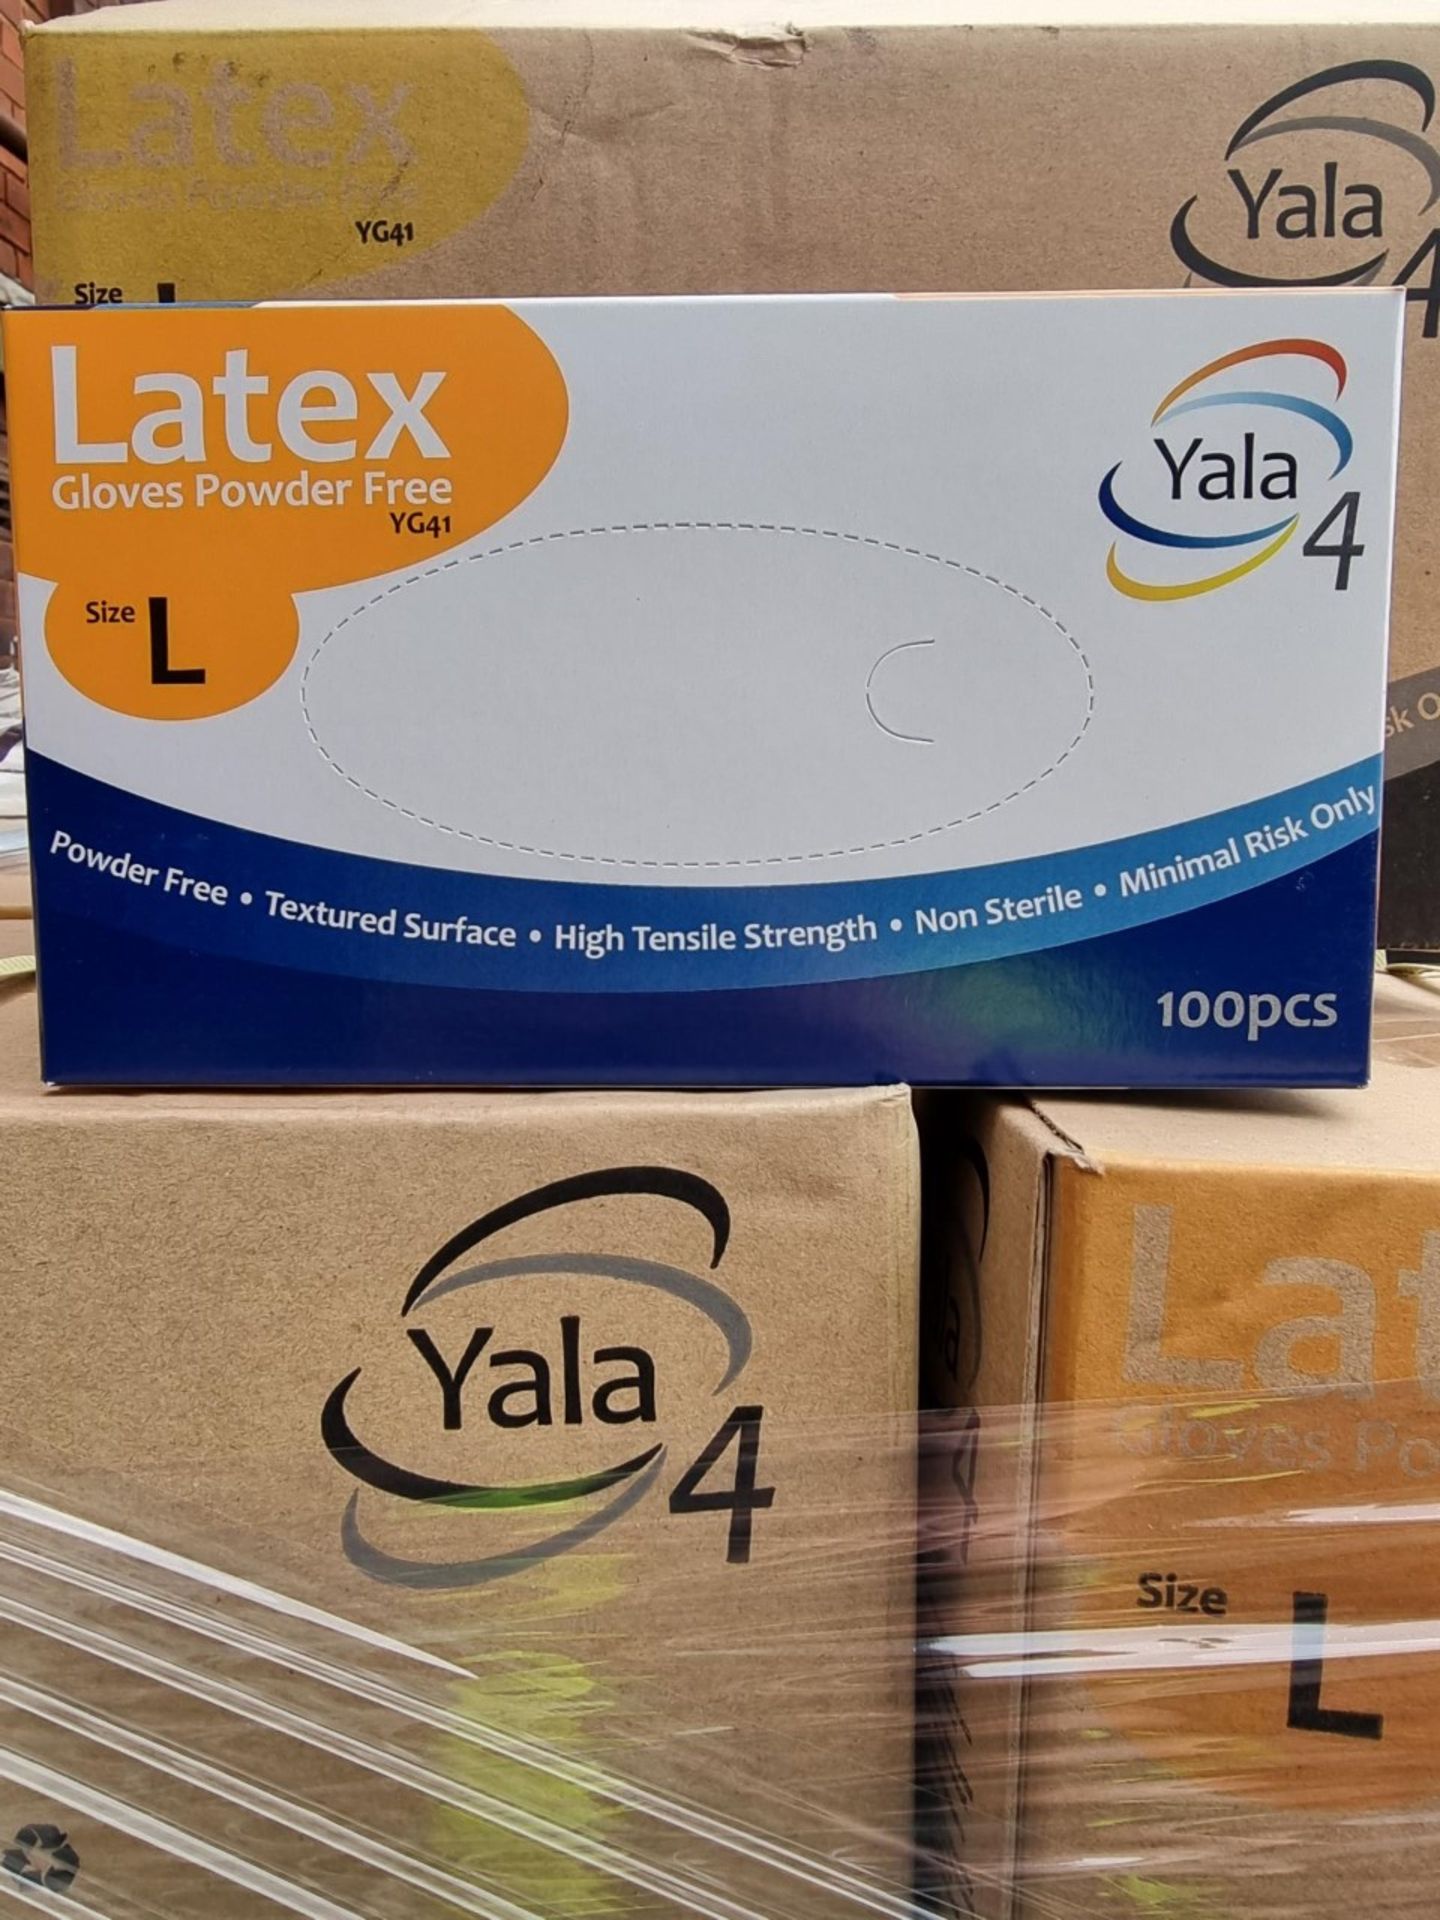 10 X BOXES EACH CONTAINING 10 BOXES OF 100 YALA LATEX POWDER FREE GLOVES. SIZE LARGE. 100 BOXES OF - Image 2 of 3